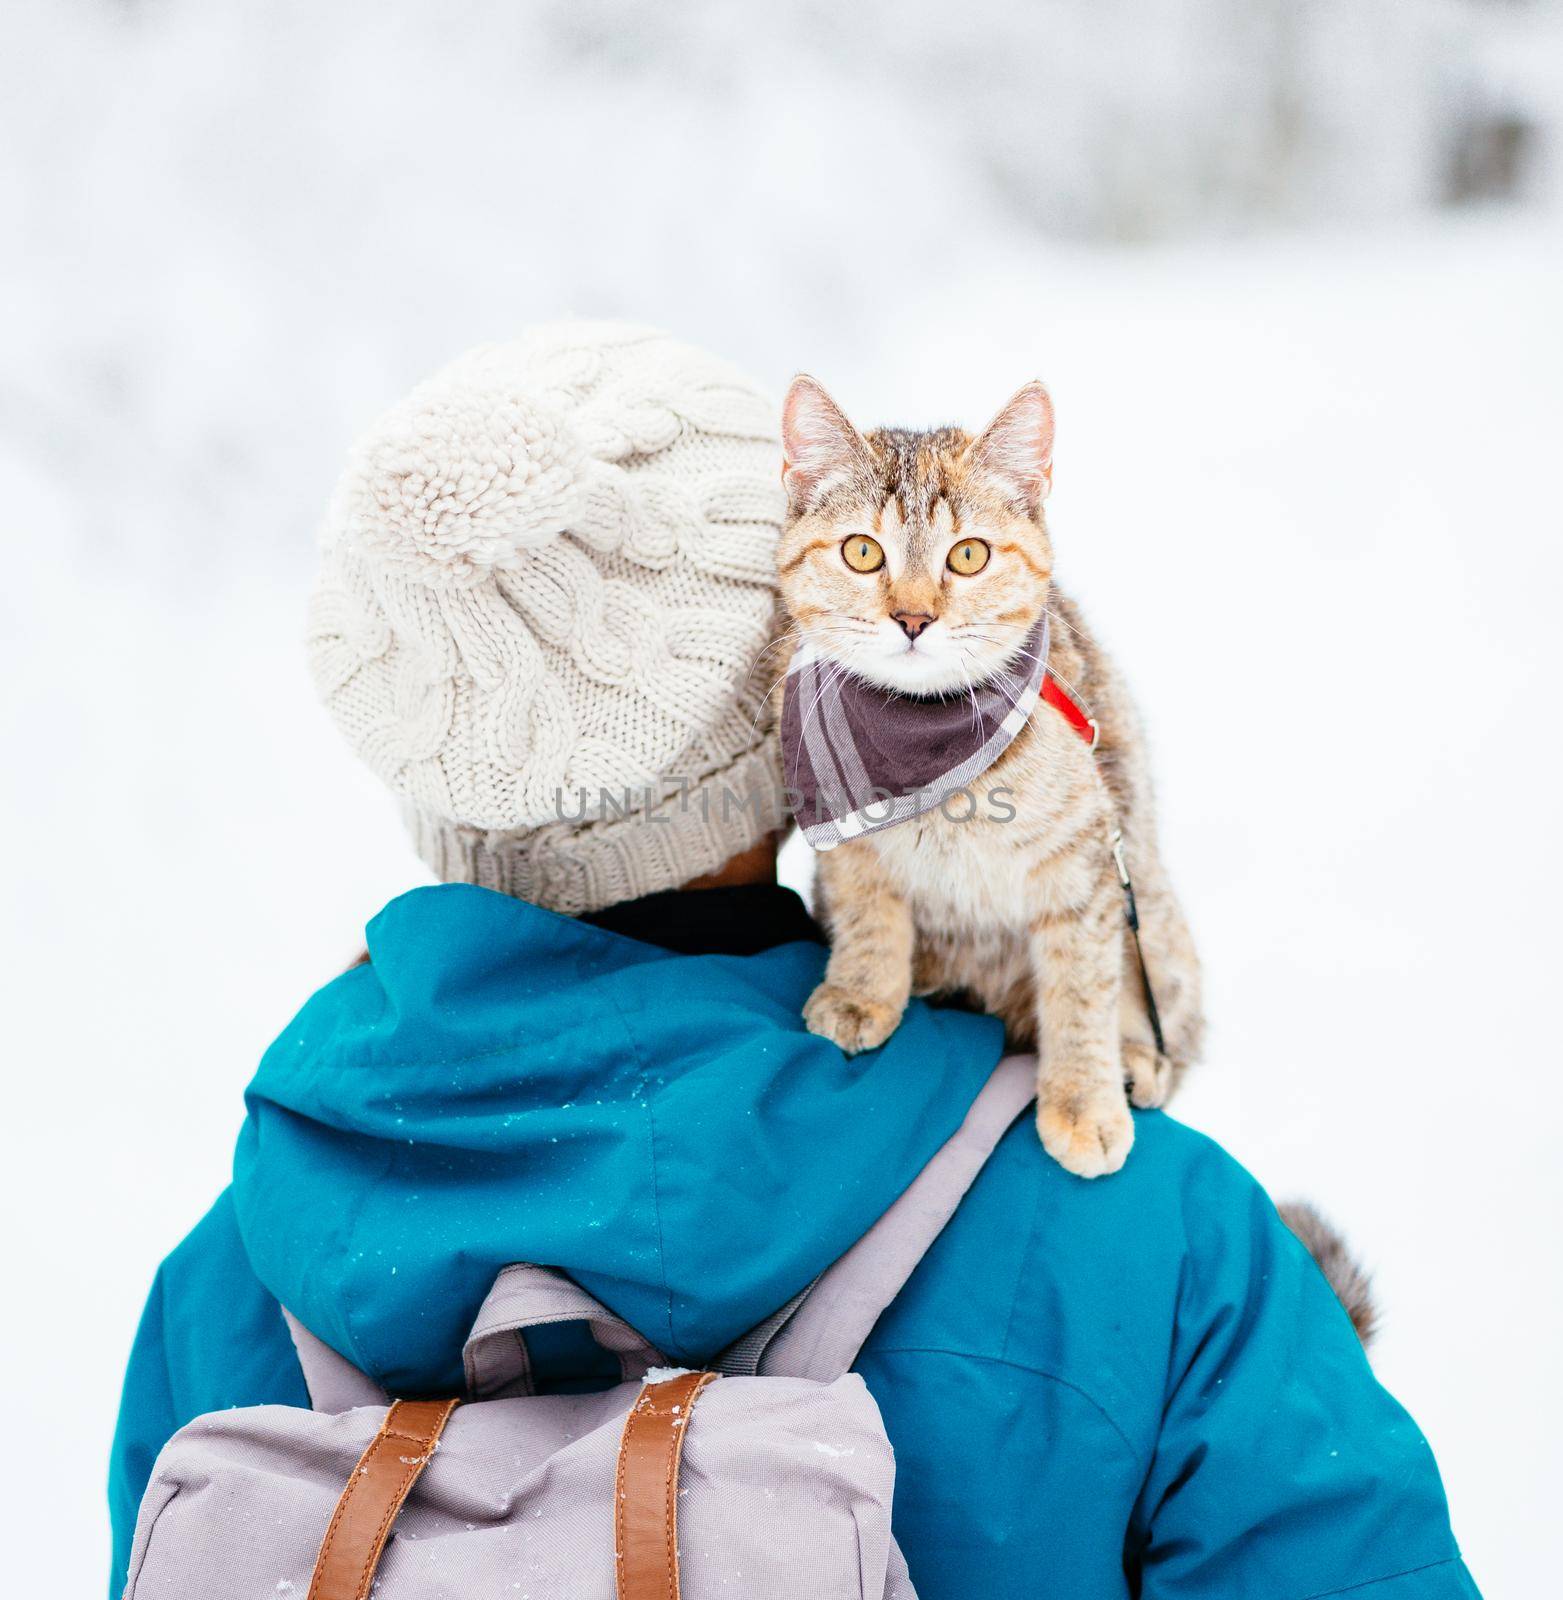 Traveler backpacker woman with cute cat on her shoulder walking in winter outdoor, cat staring at camera.